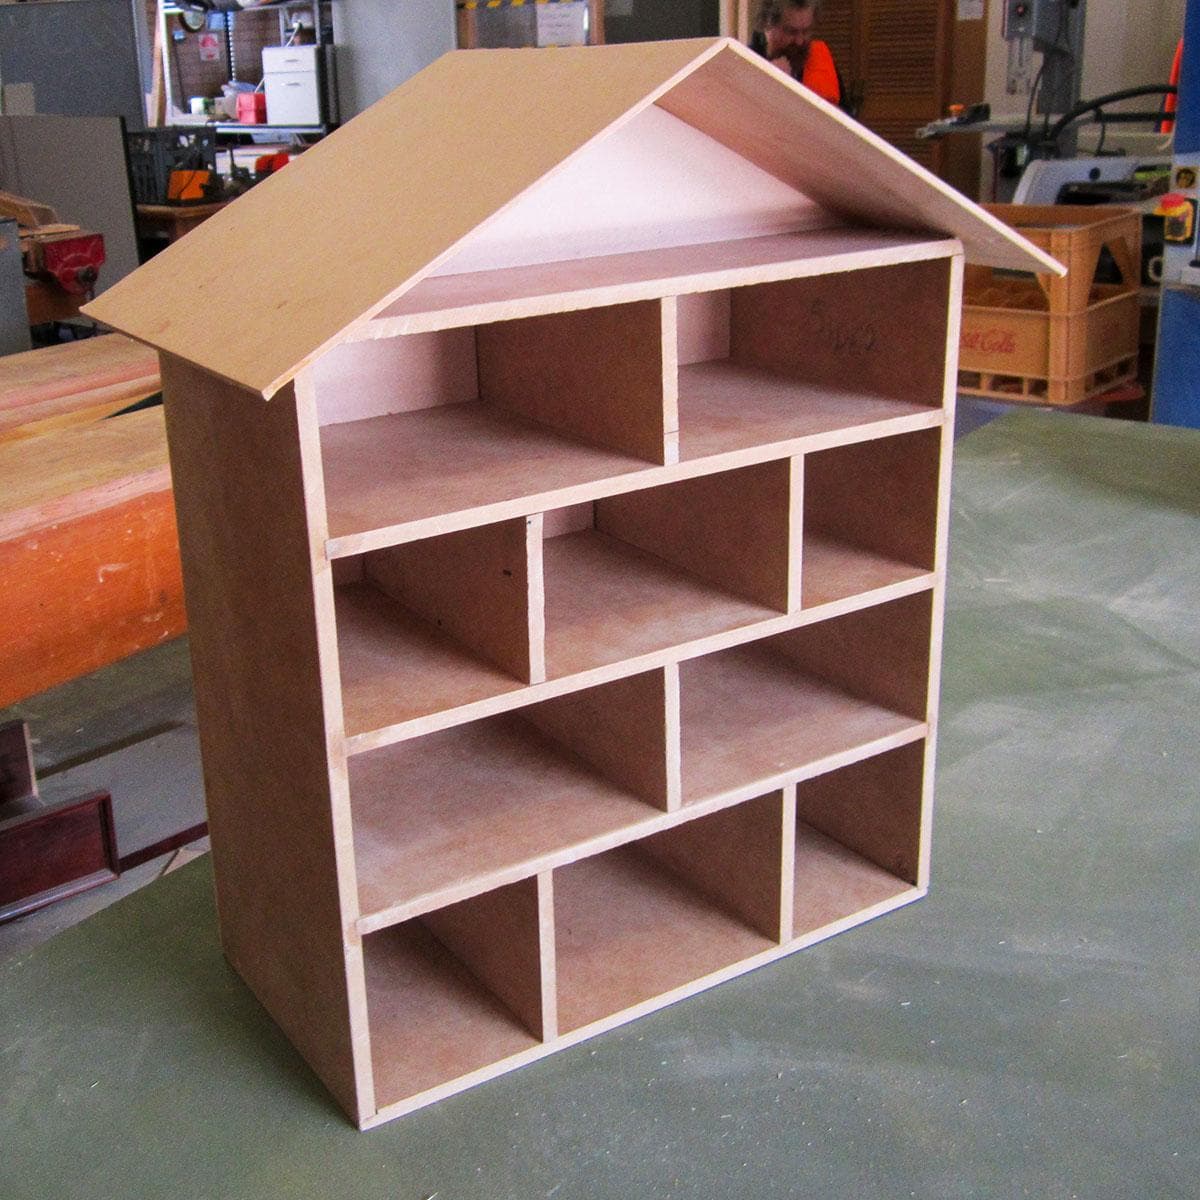 Small wooden cubby shelf with a roof